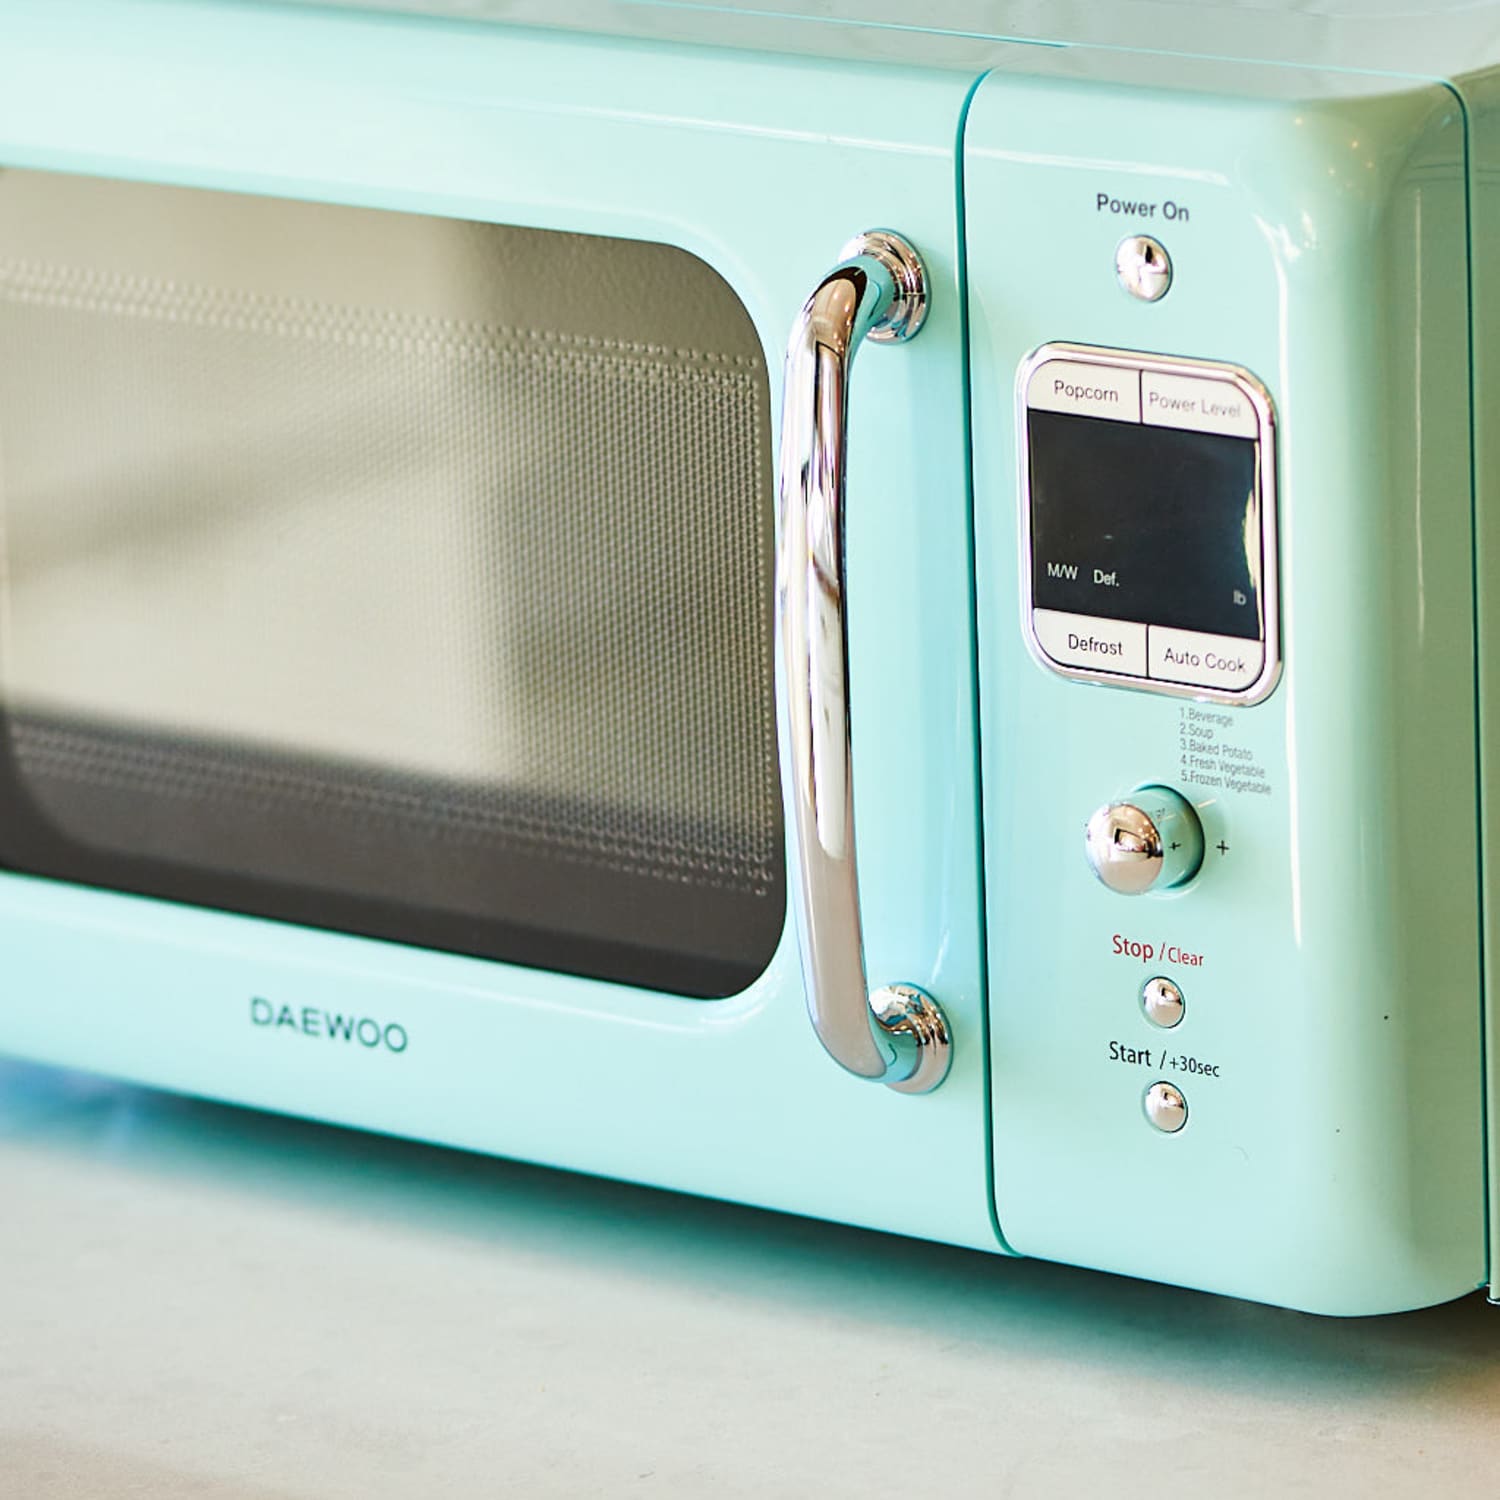 DIY: Here's How I Colored My Appliances with Heat Wrap Vinyl